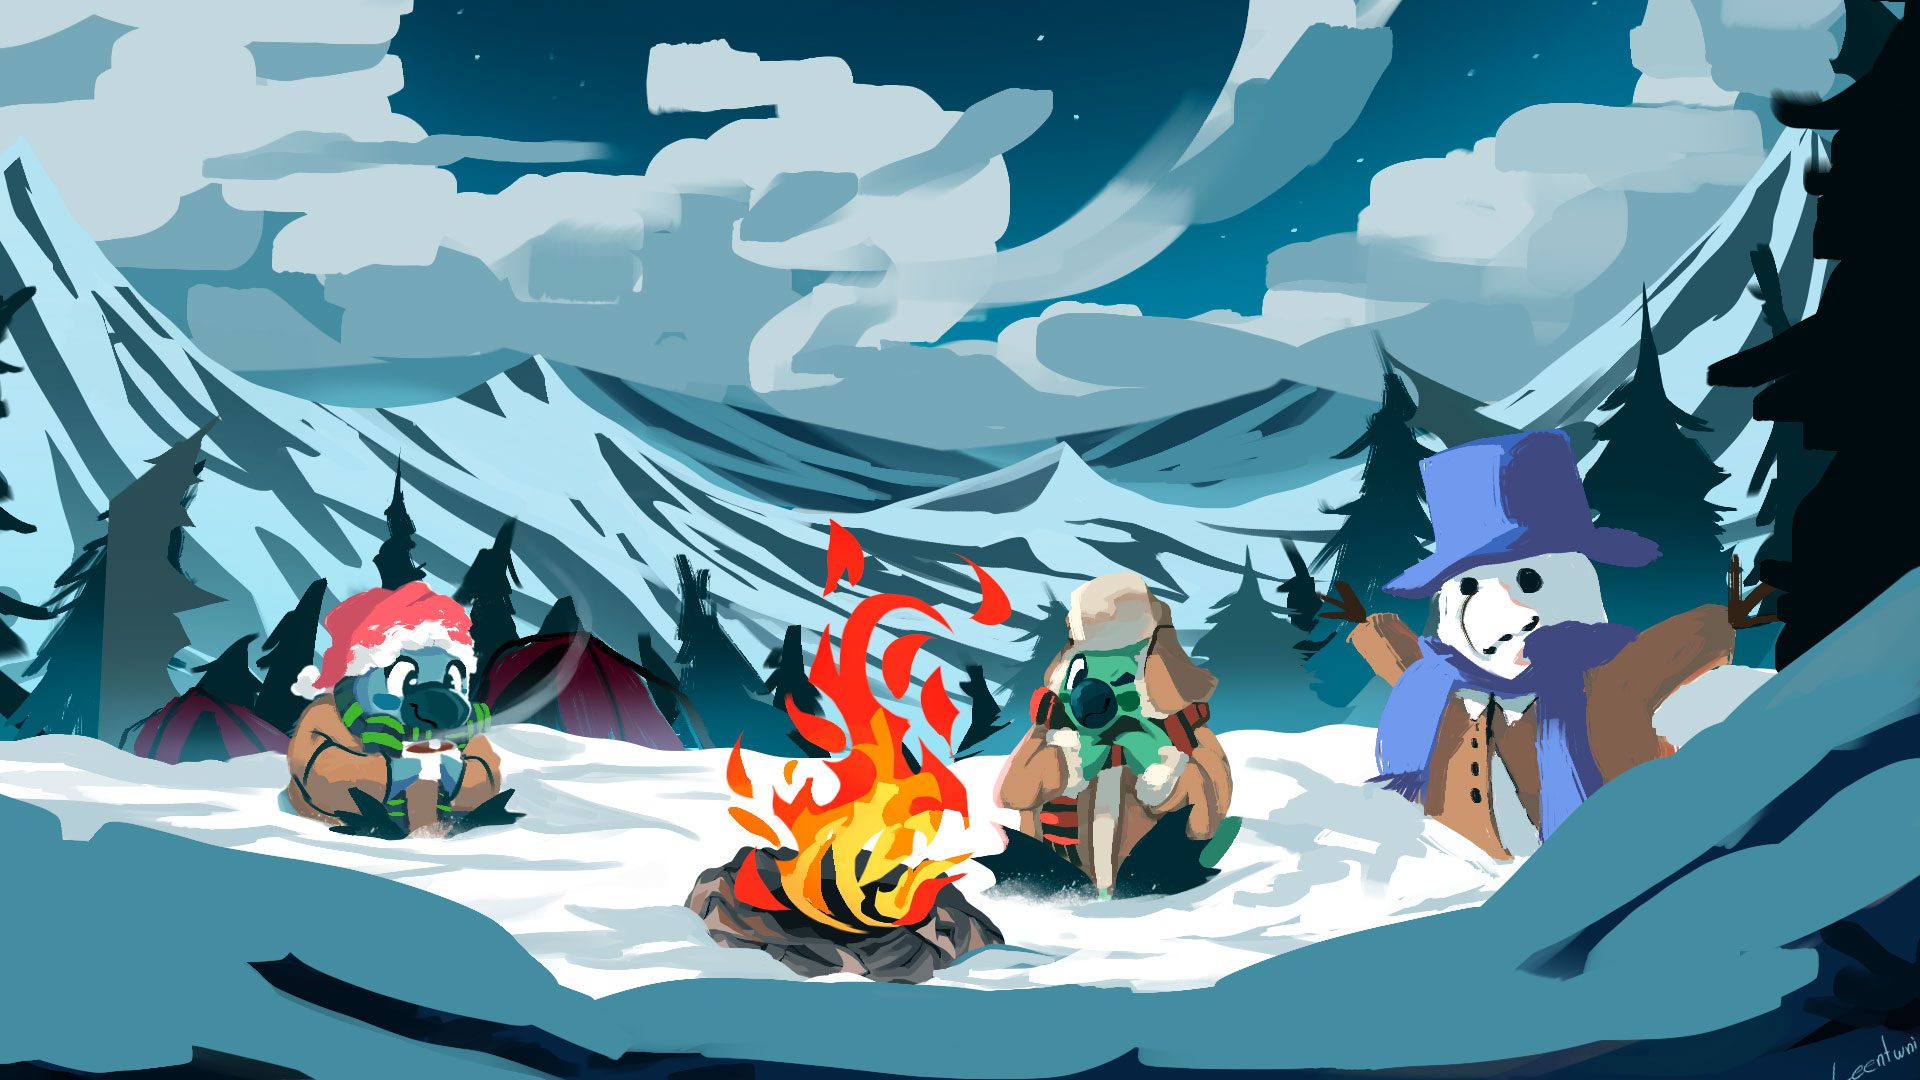 Two parrots in winter coats sit around a campfire in a snowy land with tall mountains circling around them. Mountain campfire artwork by Leentwni.